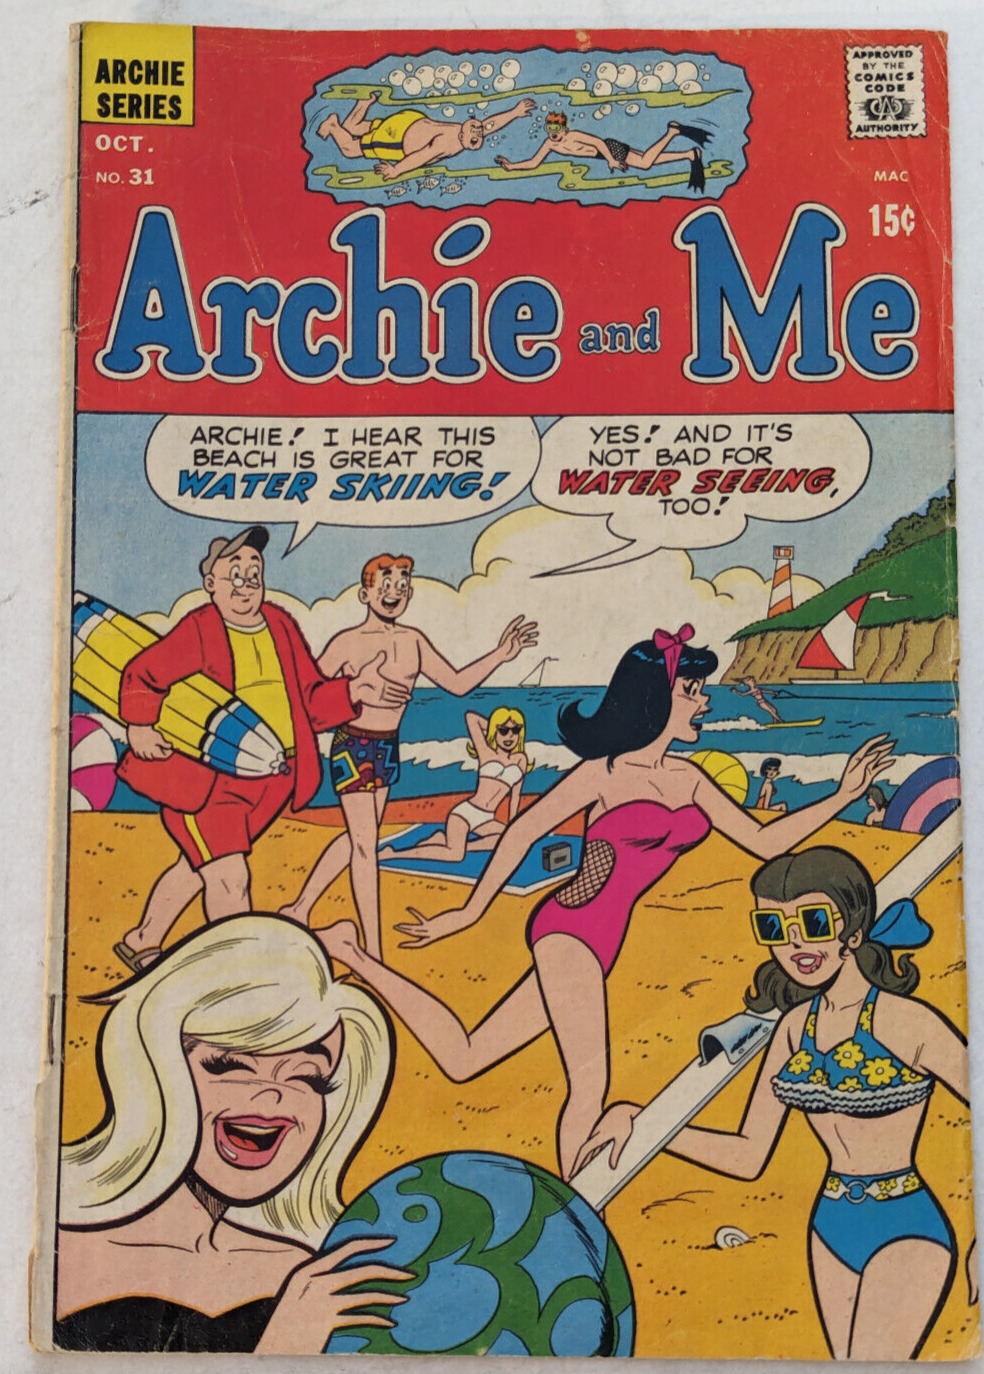 Archie and Me #31 October 1969 Good.